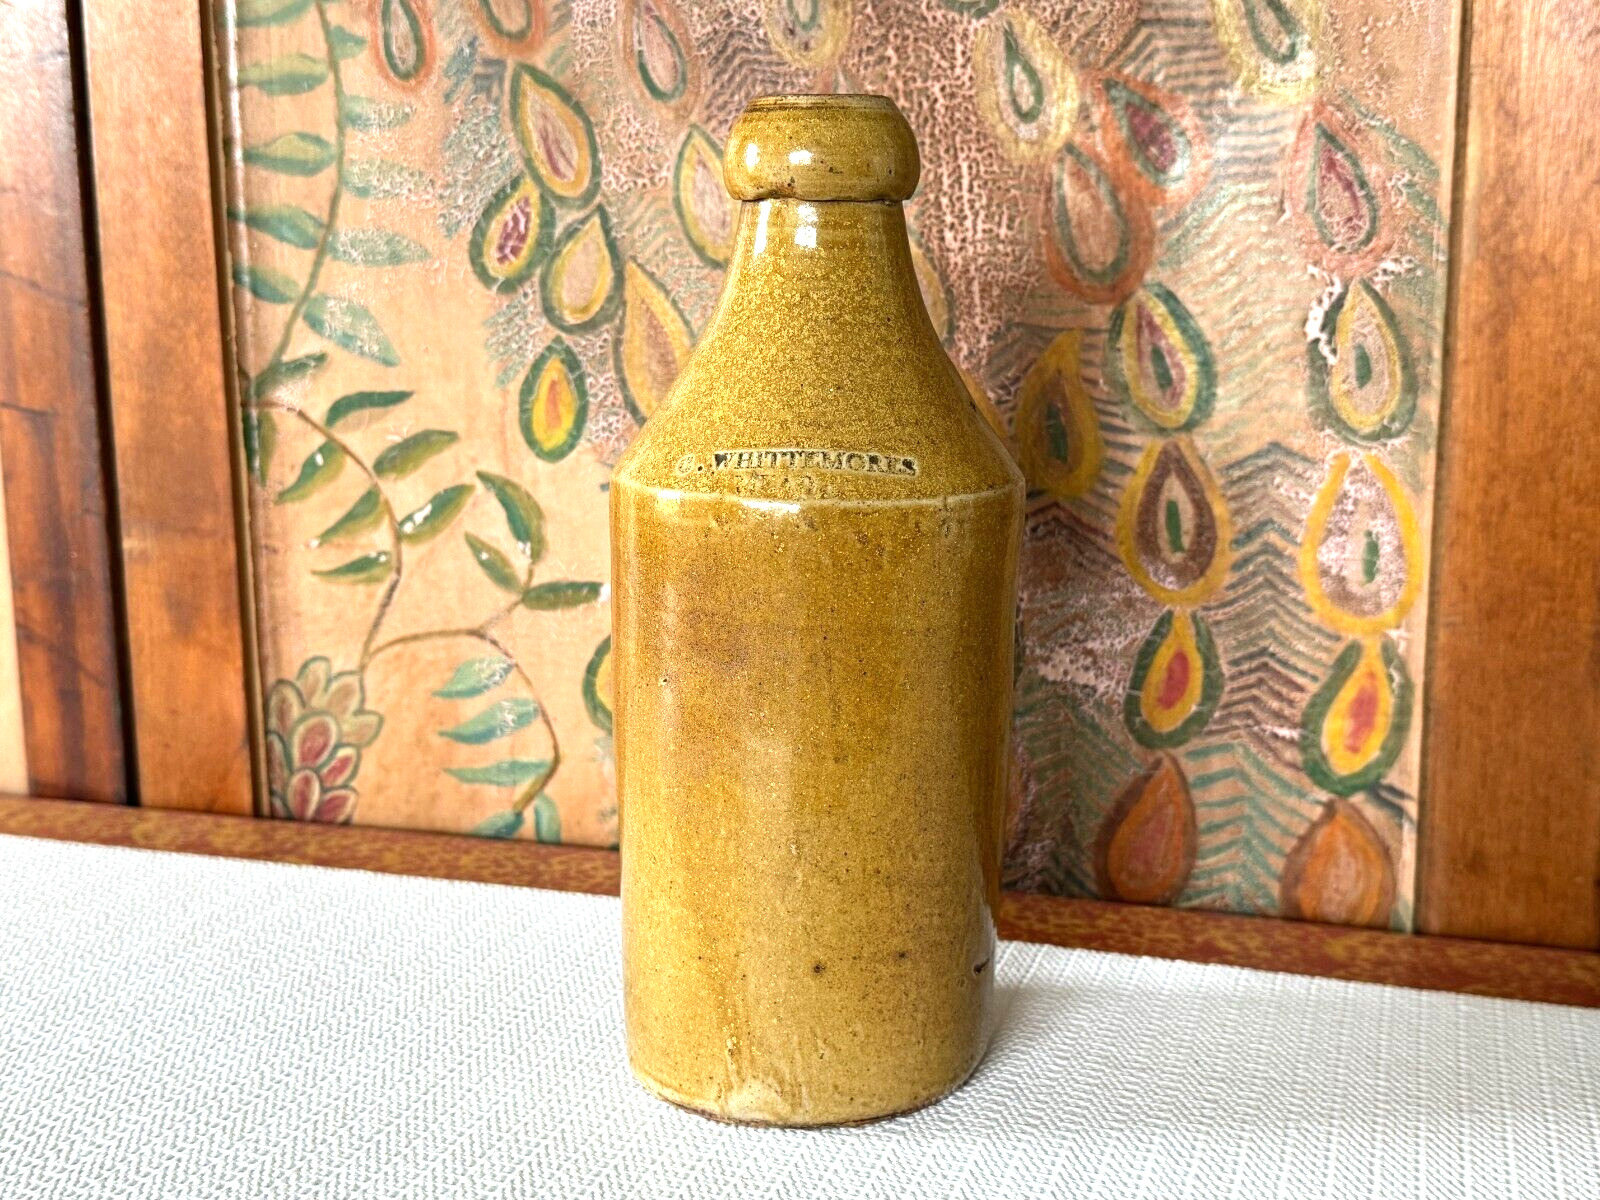 Antique Primitive Rustic Stoneware Whittemores Country Beer Bottle -New York, NY